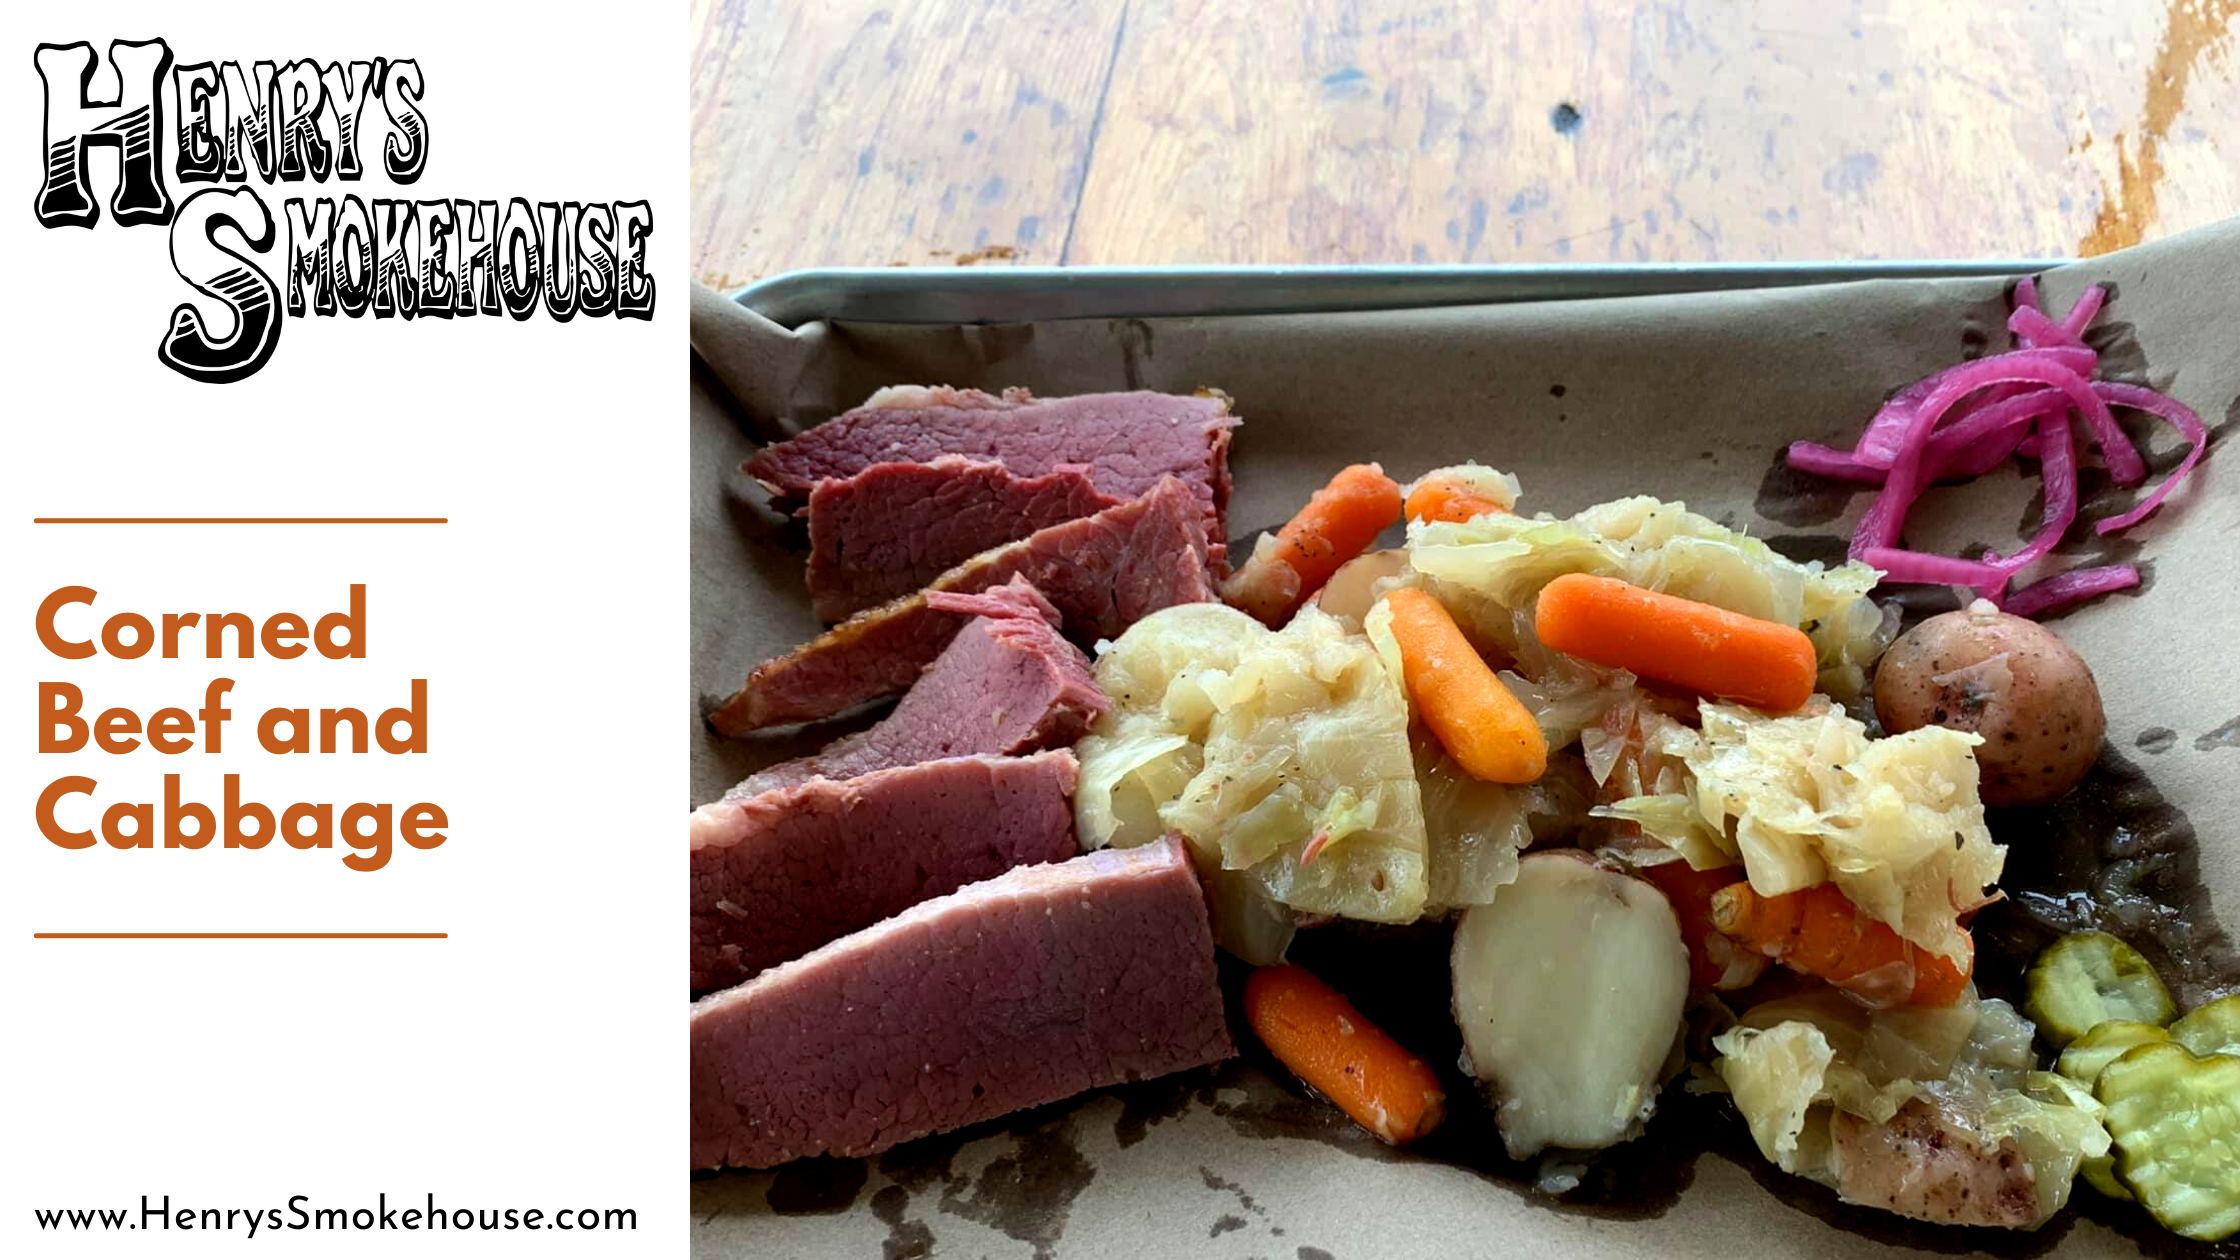 Corned Beef and Cabbage is Here